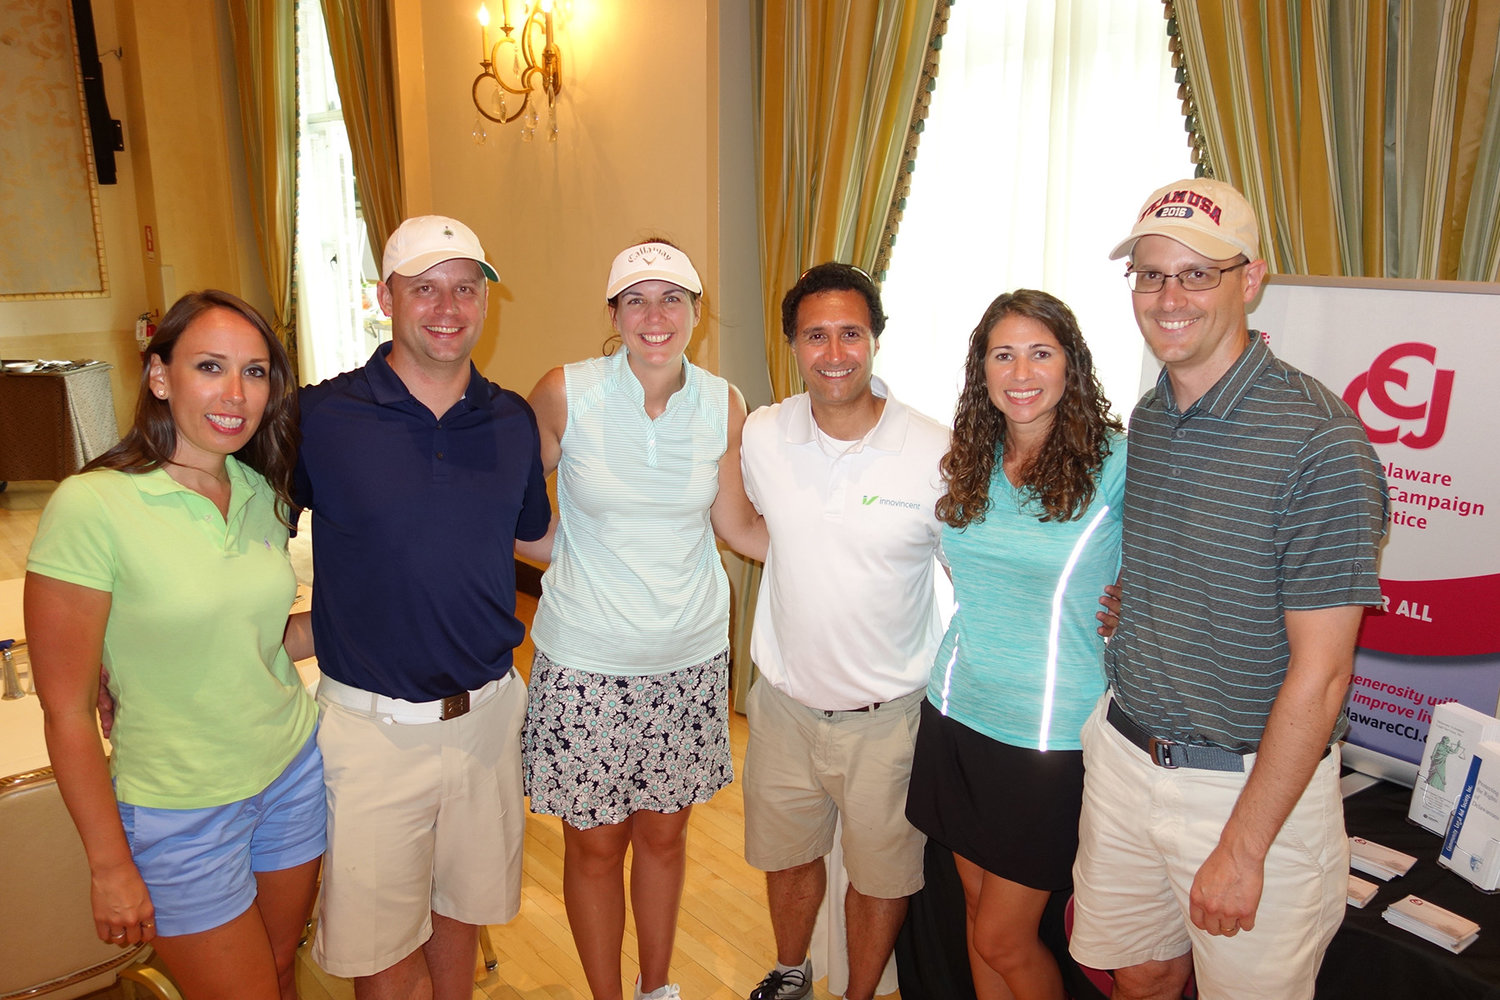  Committee Chairs (left to right): Jennifer Rutter, Esquire, Kevin Collins, Esquire, Julie Yeager, Esquire, Charlie Vincent, Esquire, Jaclyn Quinn, Esquire and Jason Stoehr. 